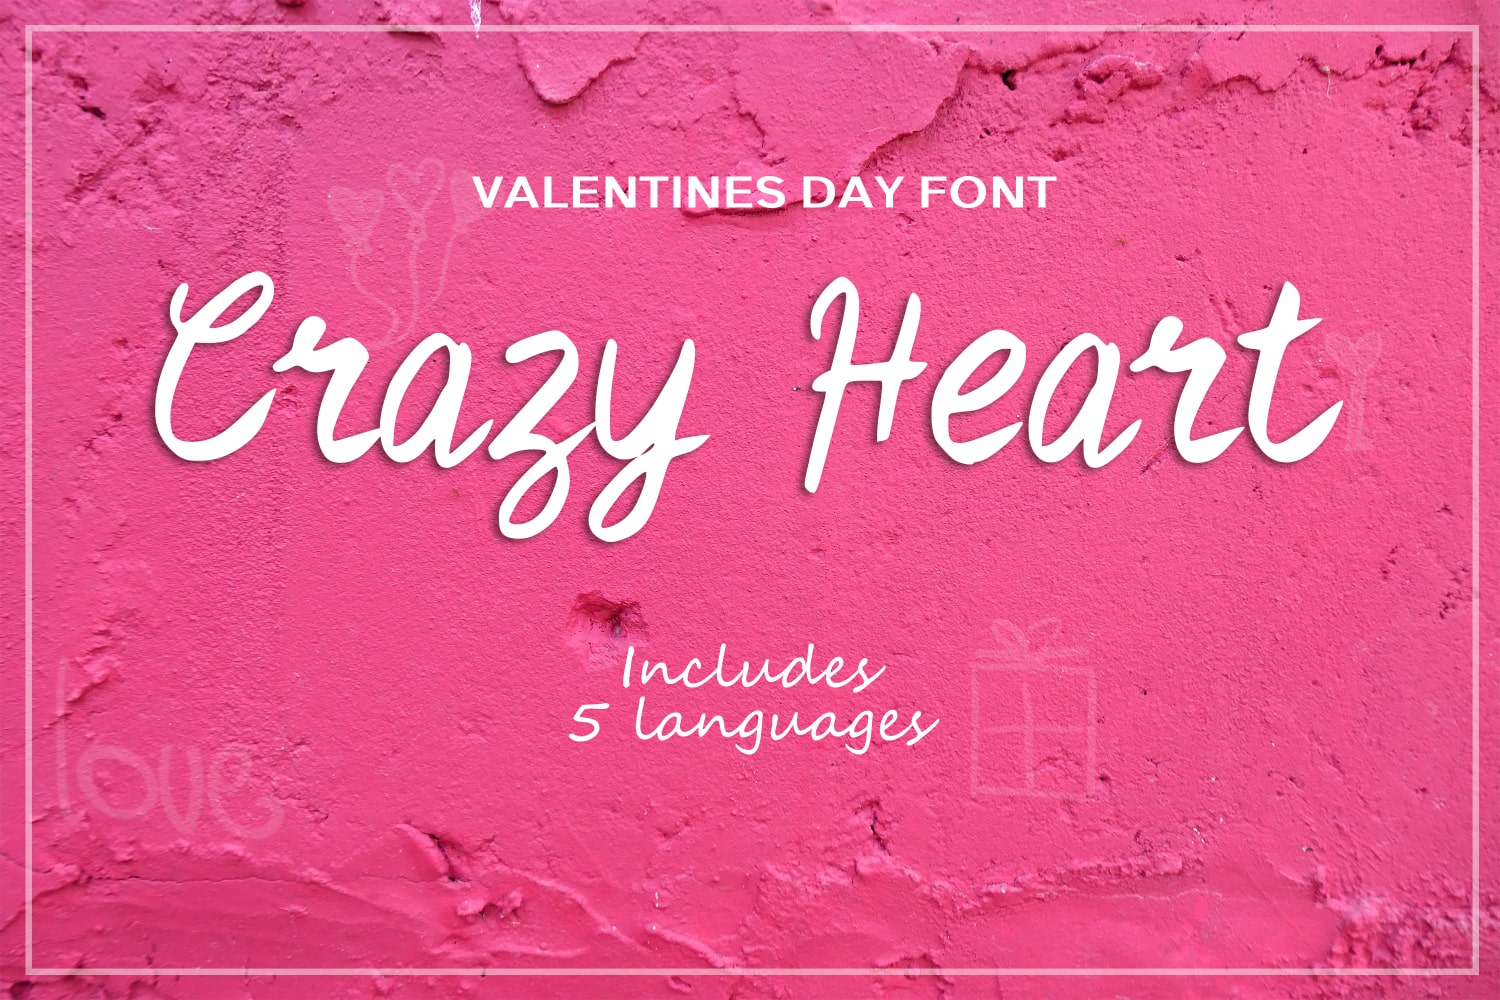 Bright pink background with calligraphy font.